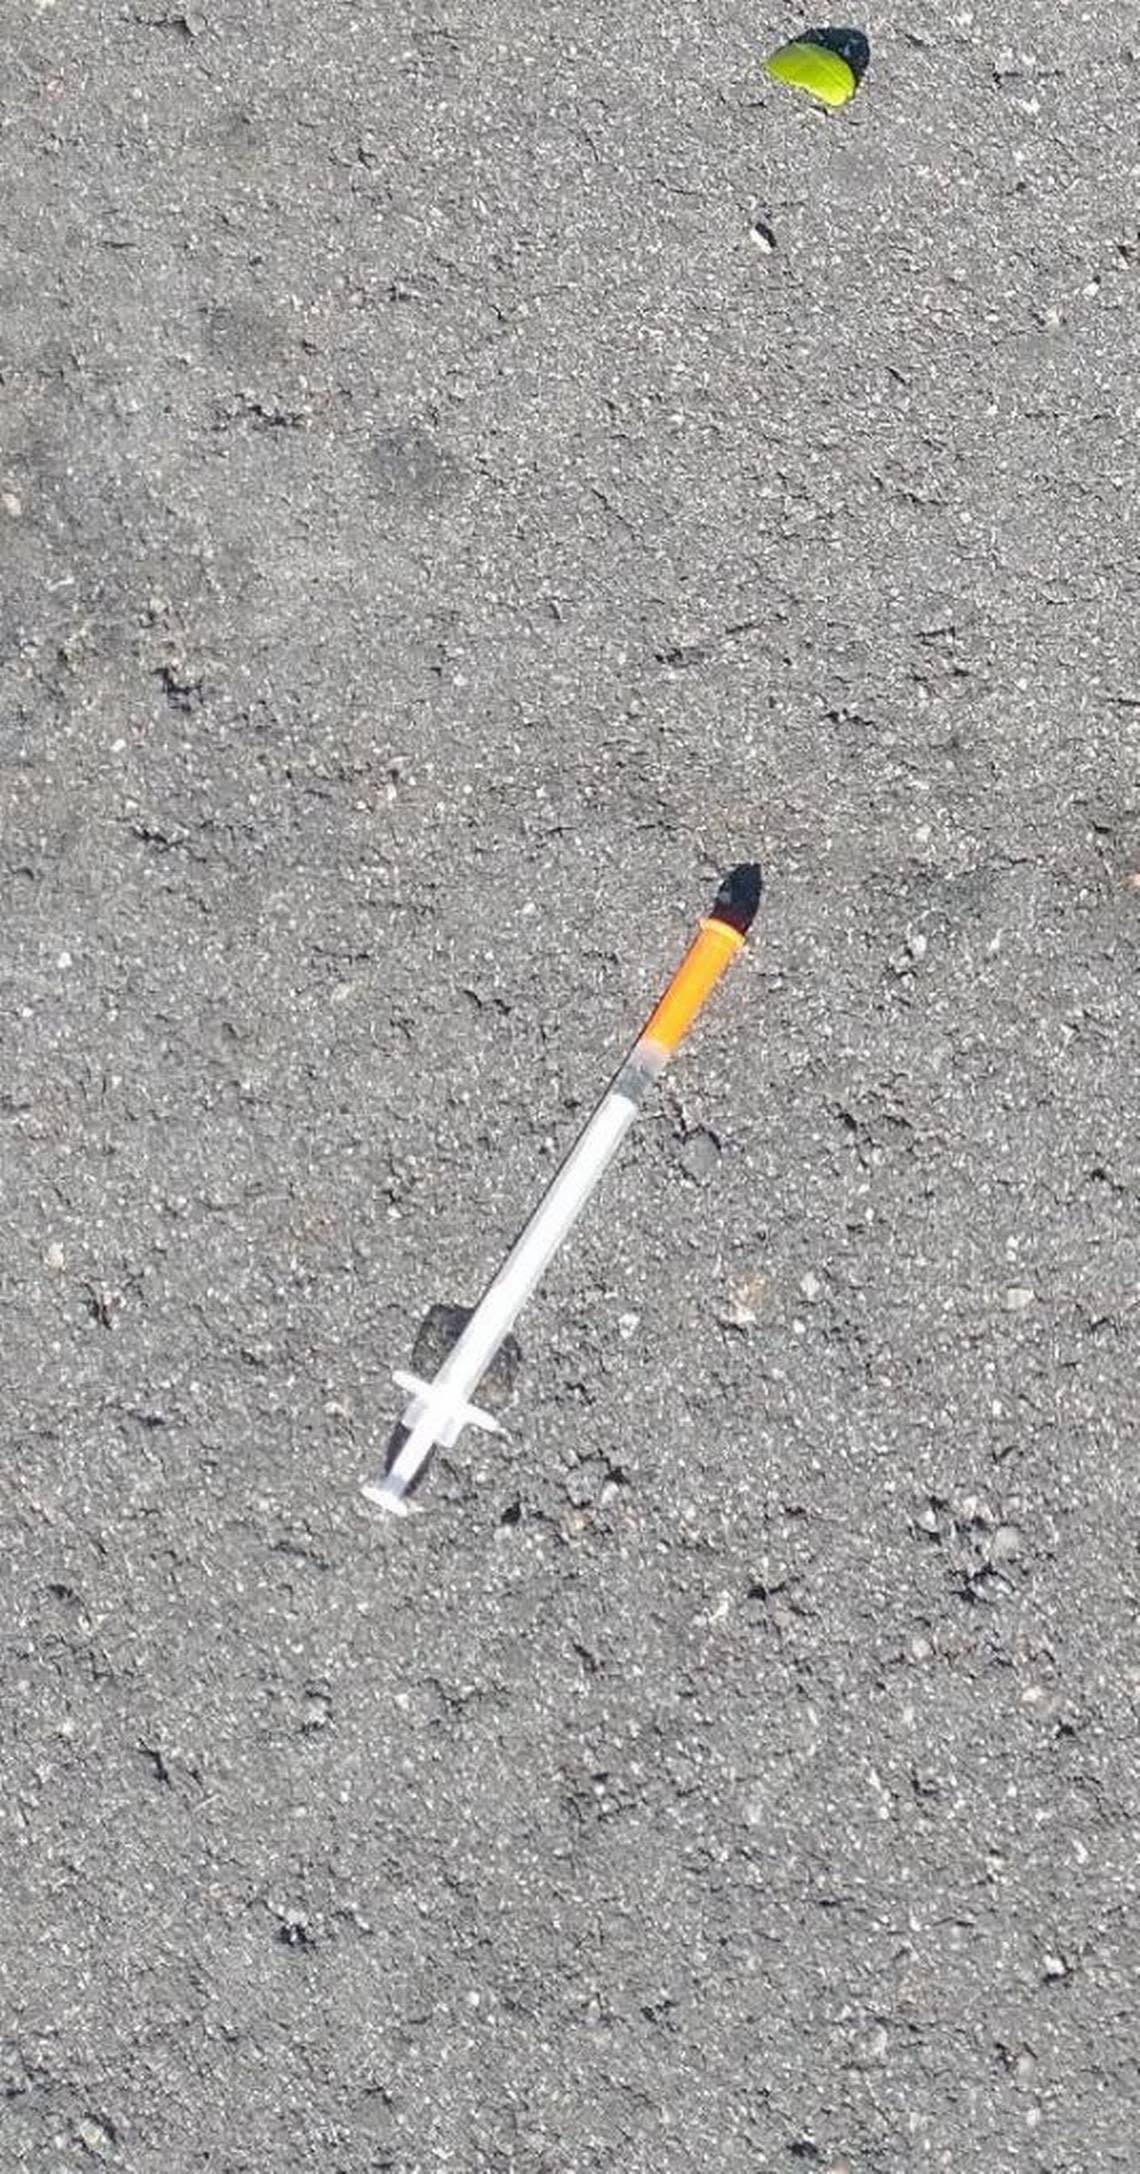 An empty syringe neighbor Jim Henry found on the ground in Ramsey Acres on April 12. He said he was walking his dog around Park Drive and saw it.